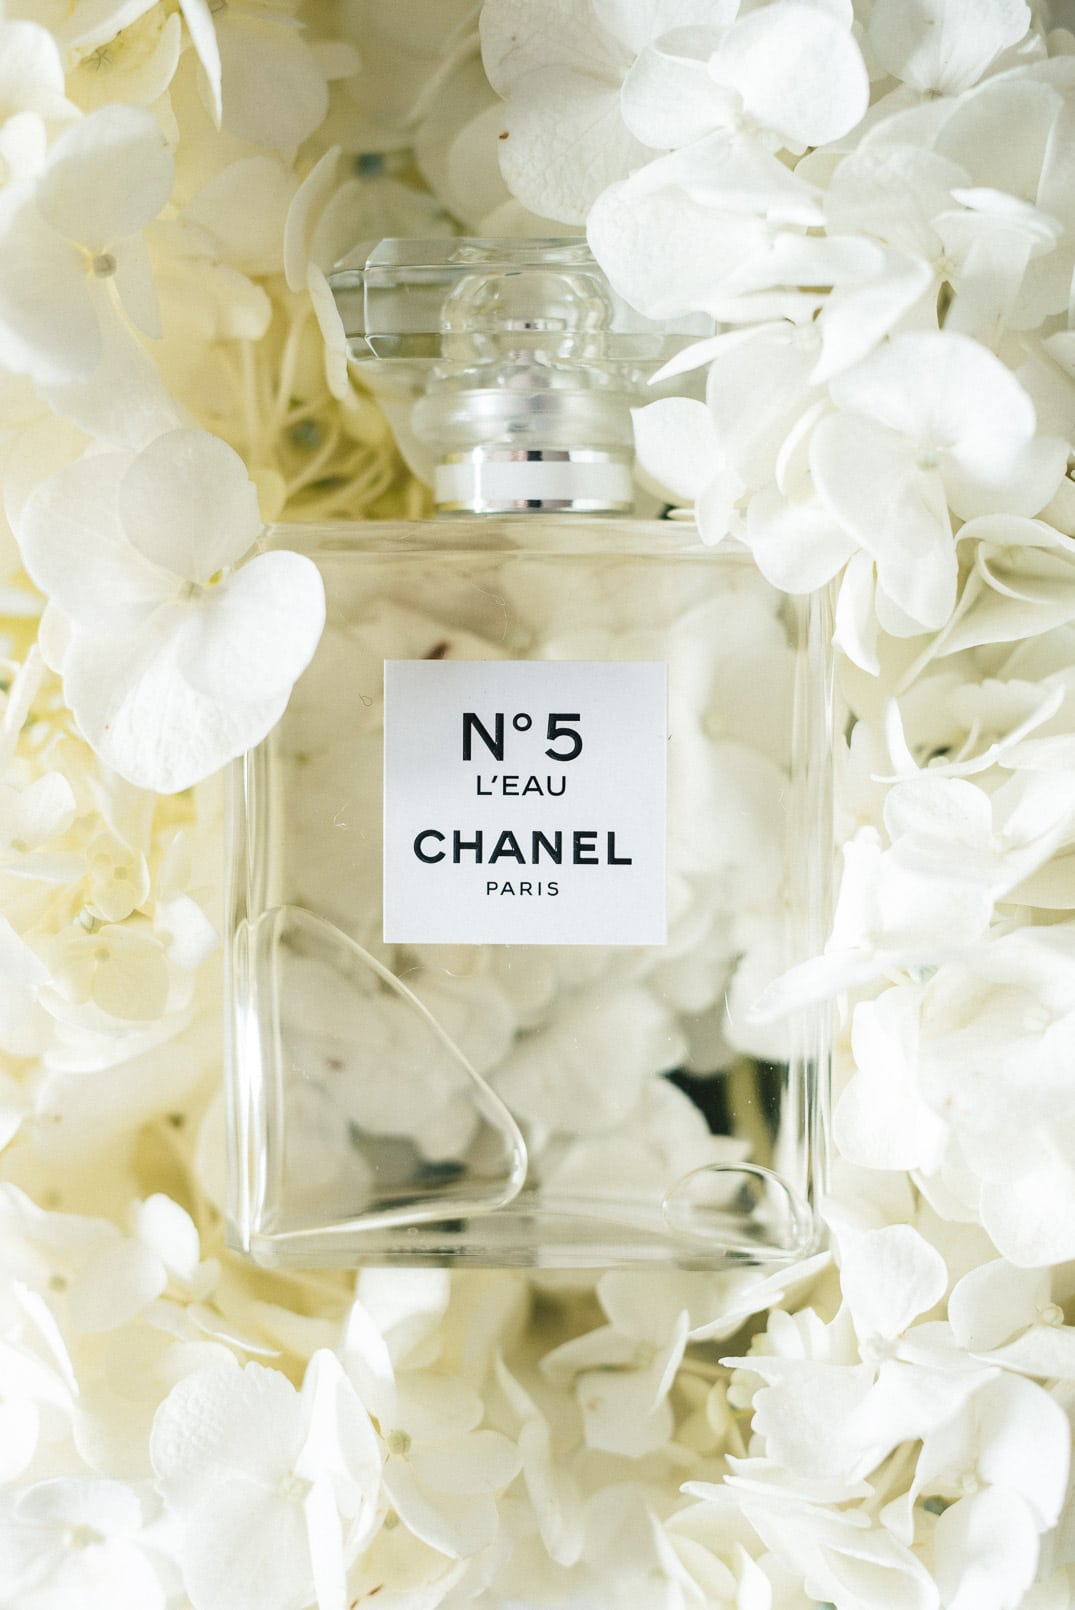 What You Don't Know About the New Chanel N°5 L'EAU - The Girl from Panama